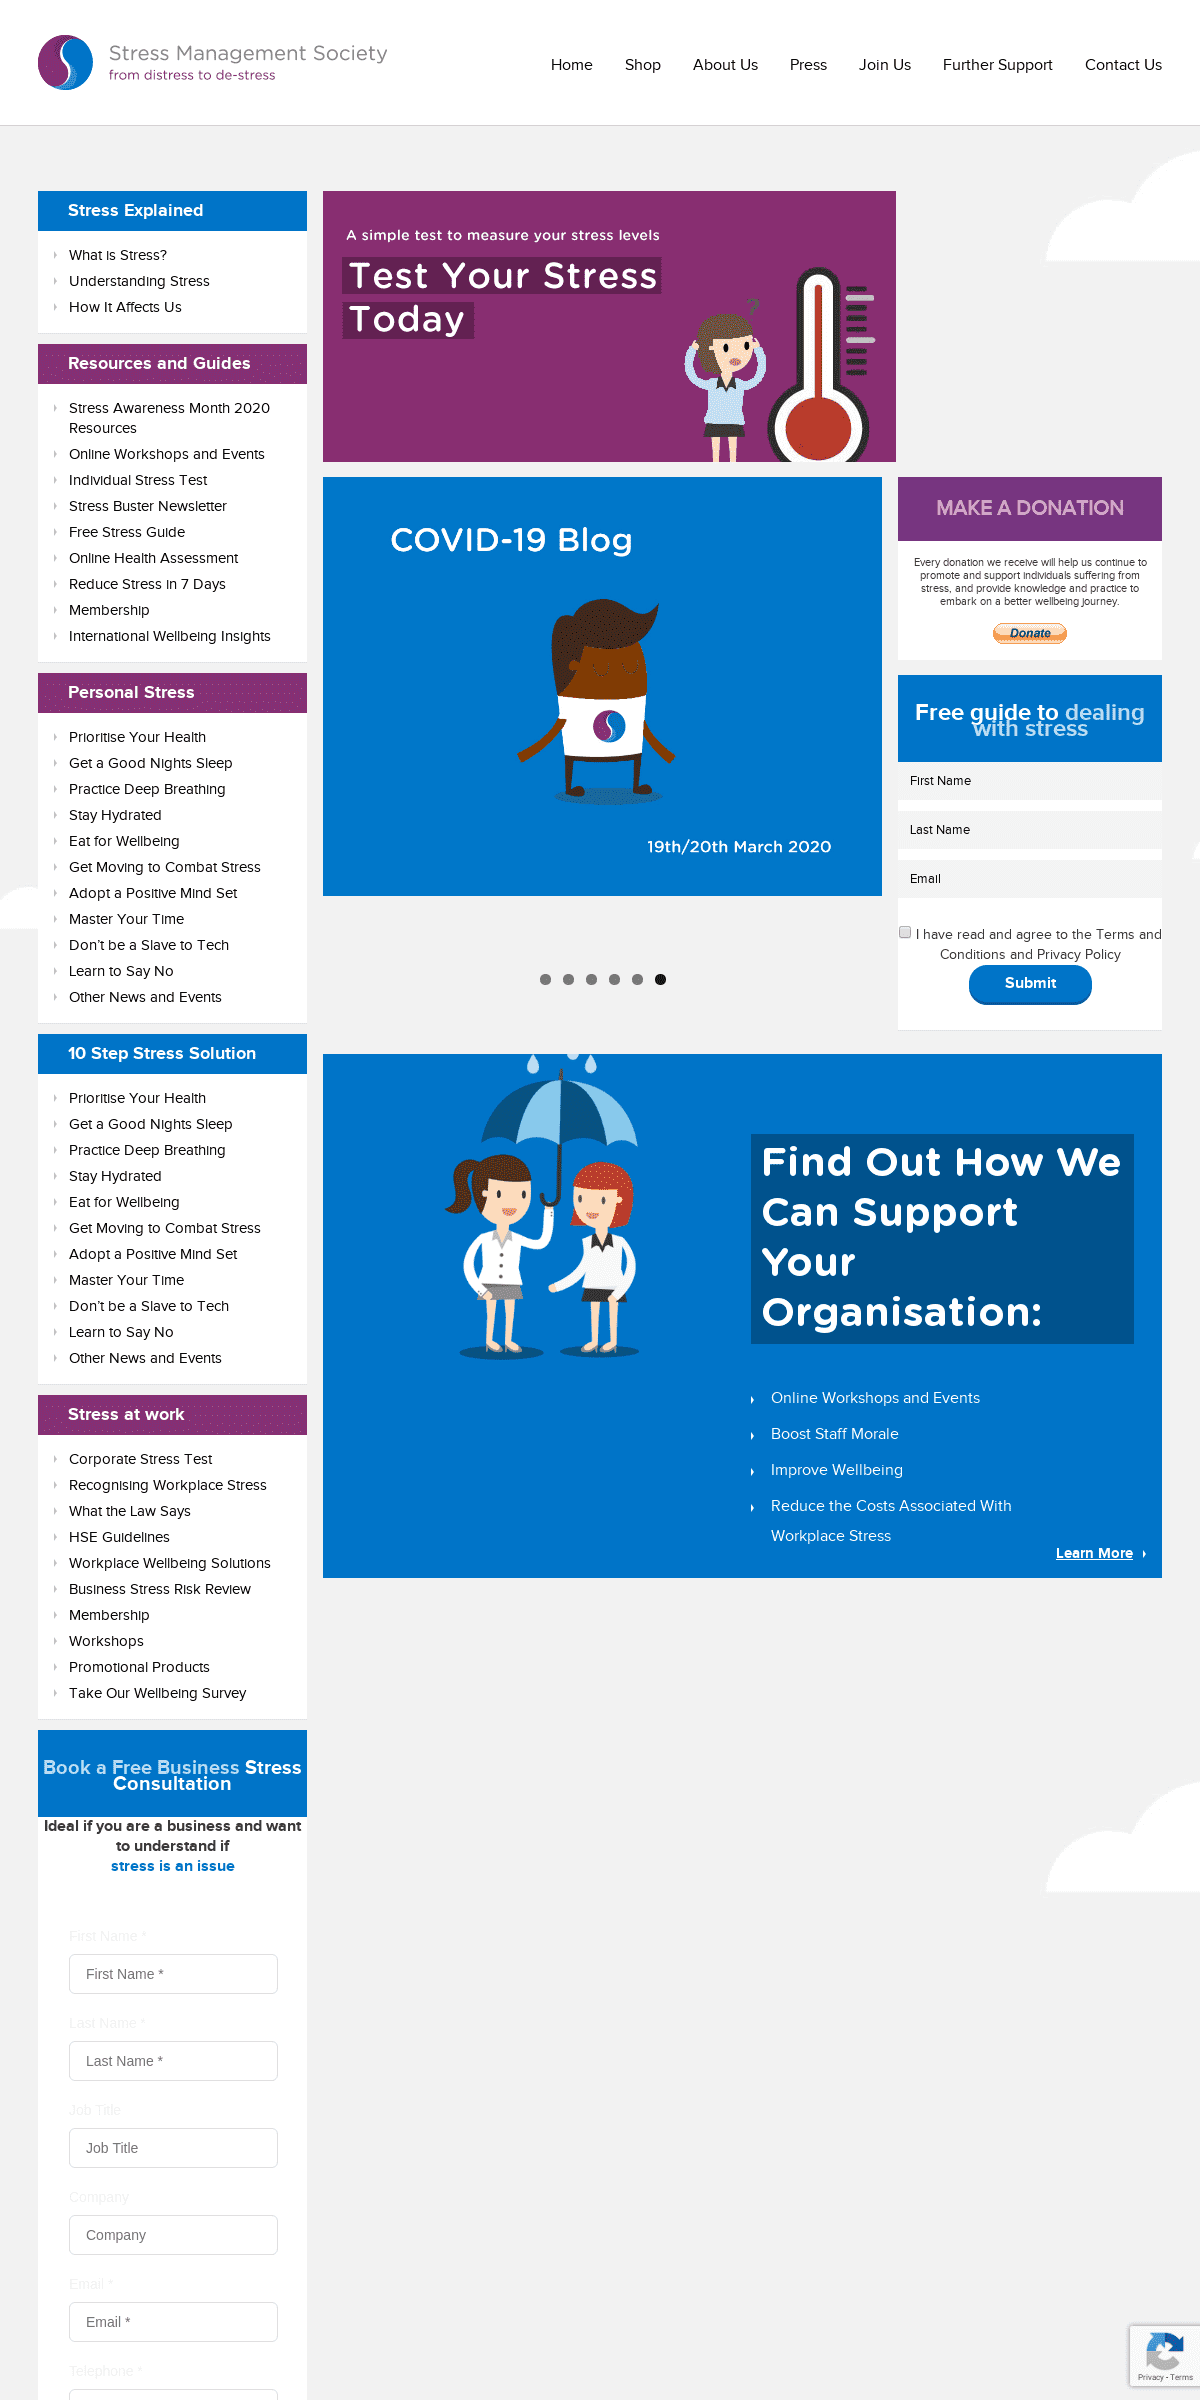 A complete backup of stress.org.uk